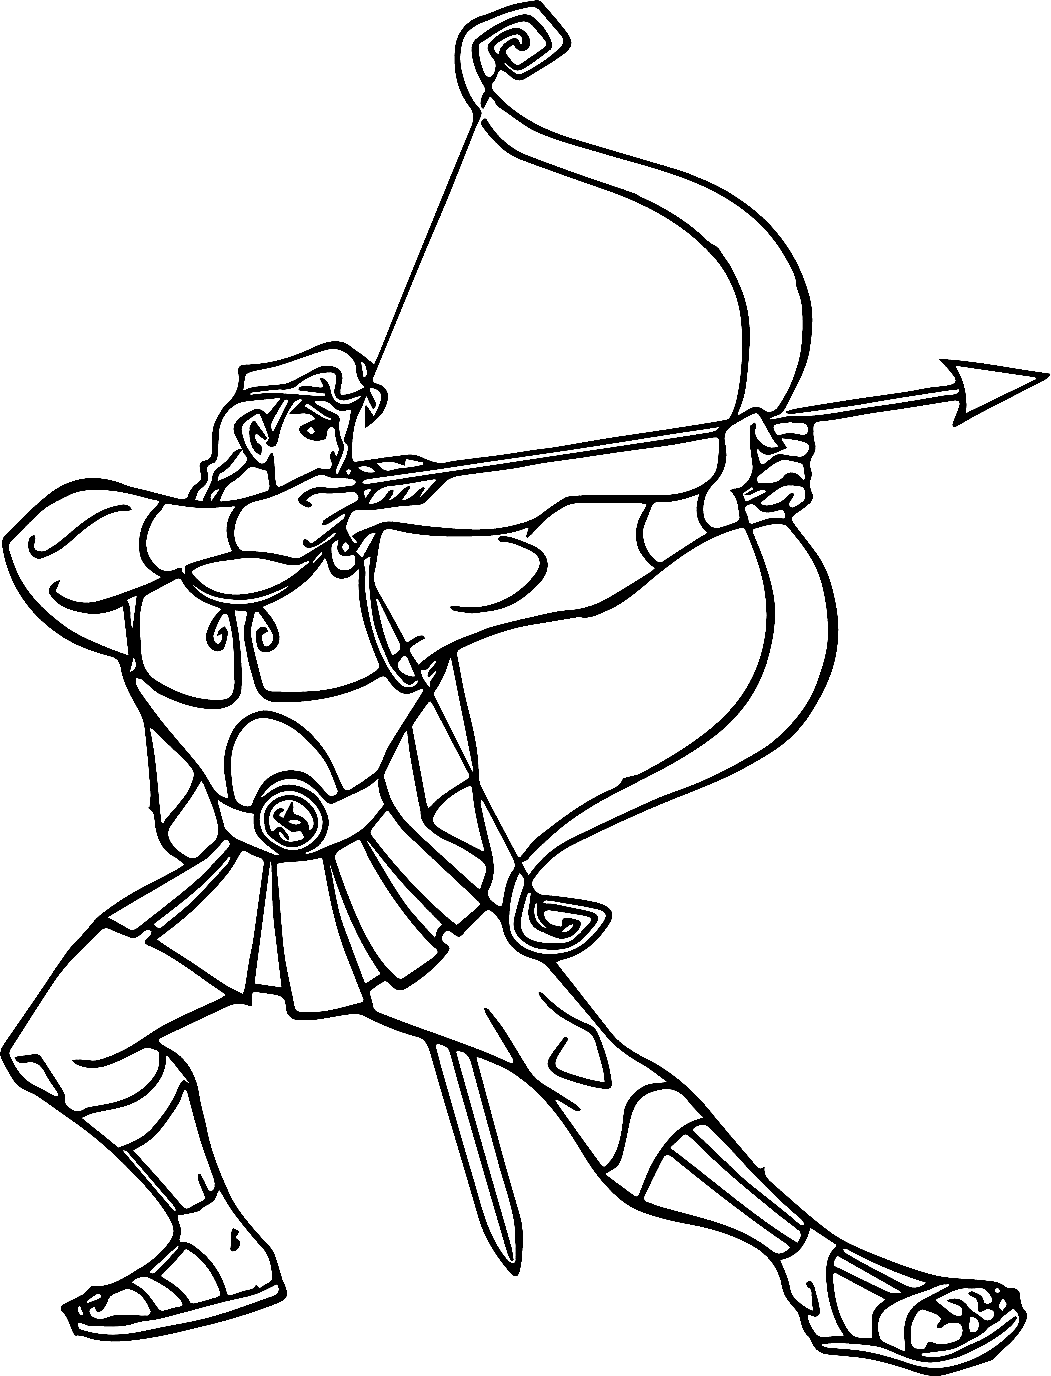 Hercules Archery Coloring Page